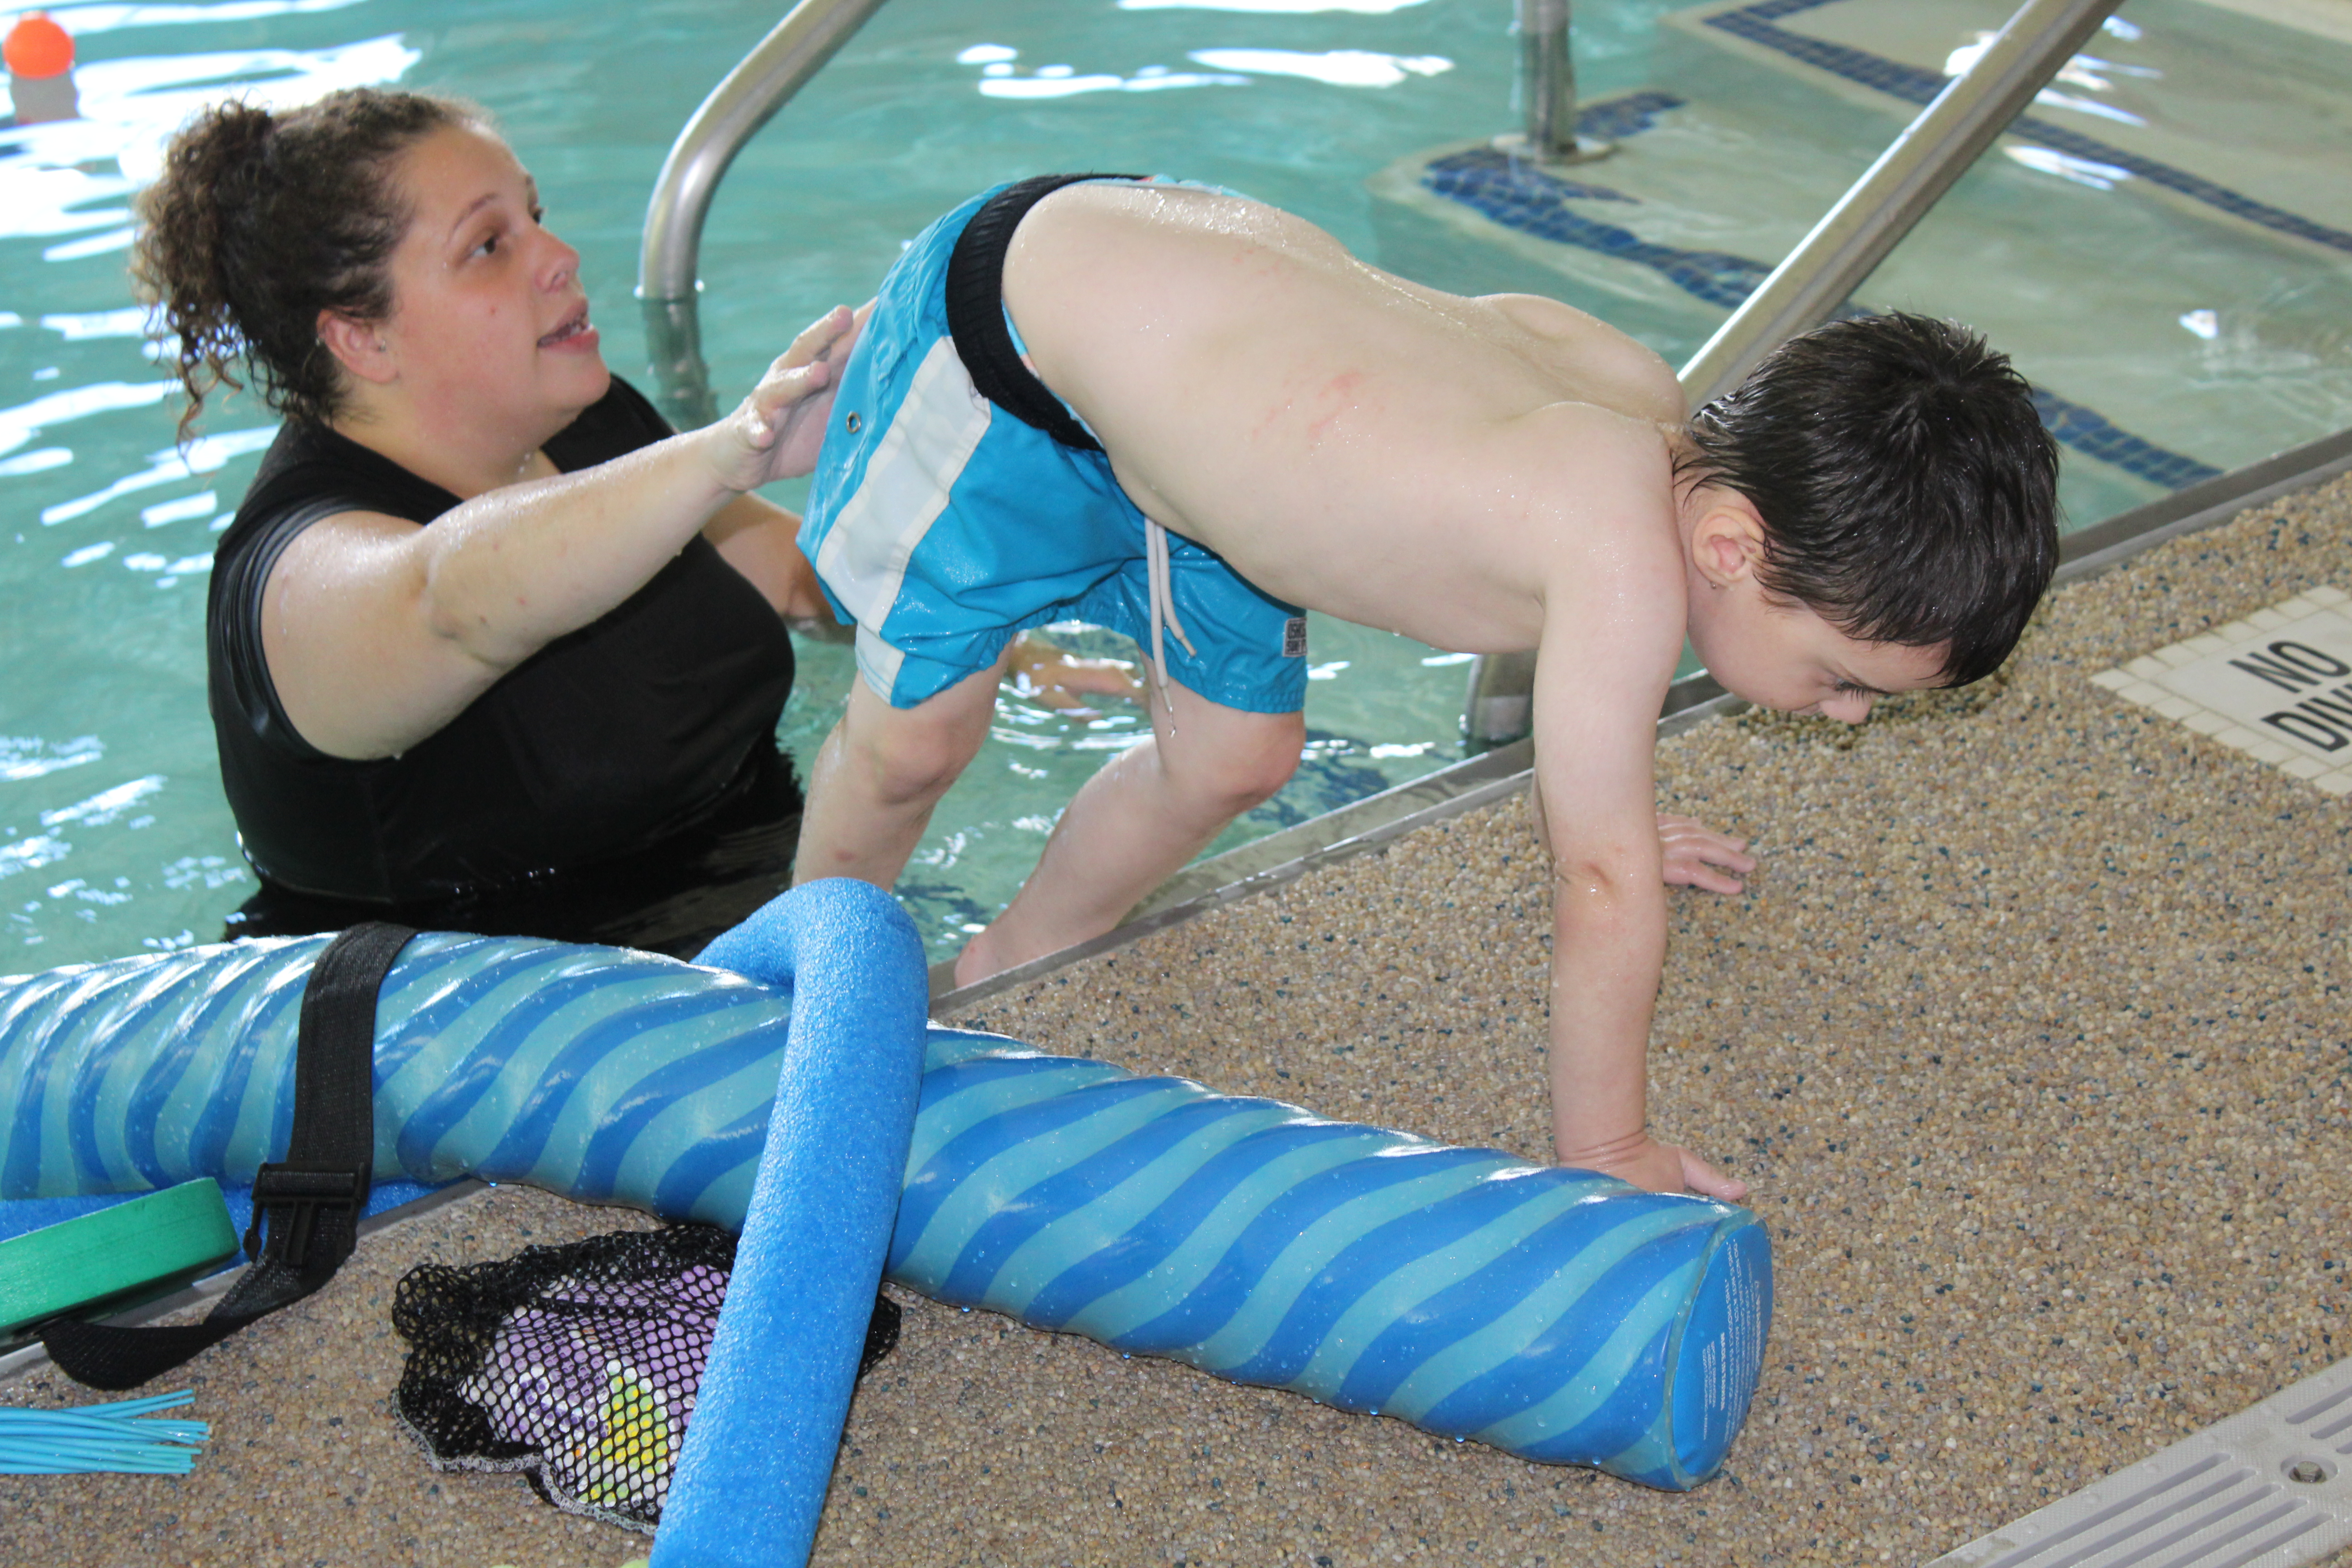 aquatic therapist working with child on strengthening lower extremity